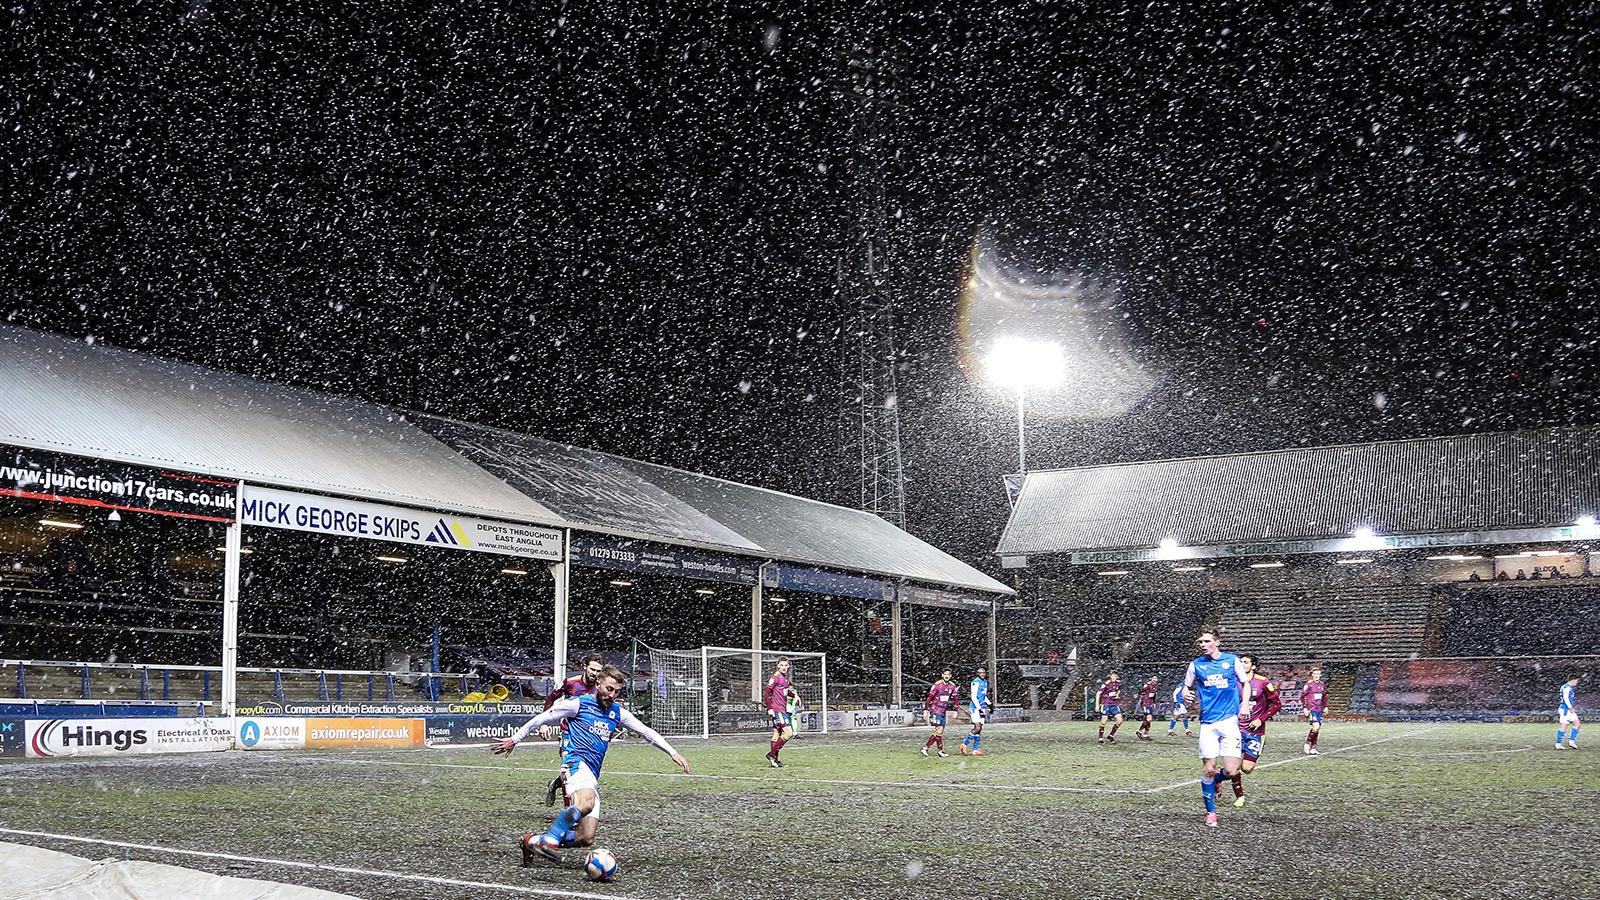 9th February '21 | A home win in the snow over Ipswich Town